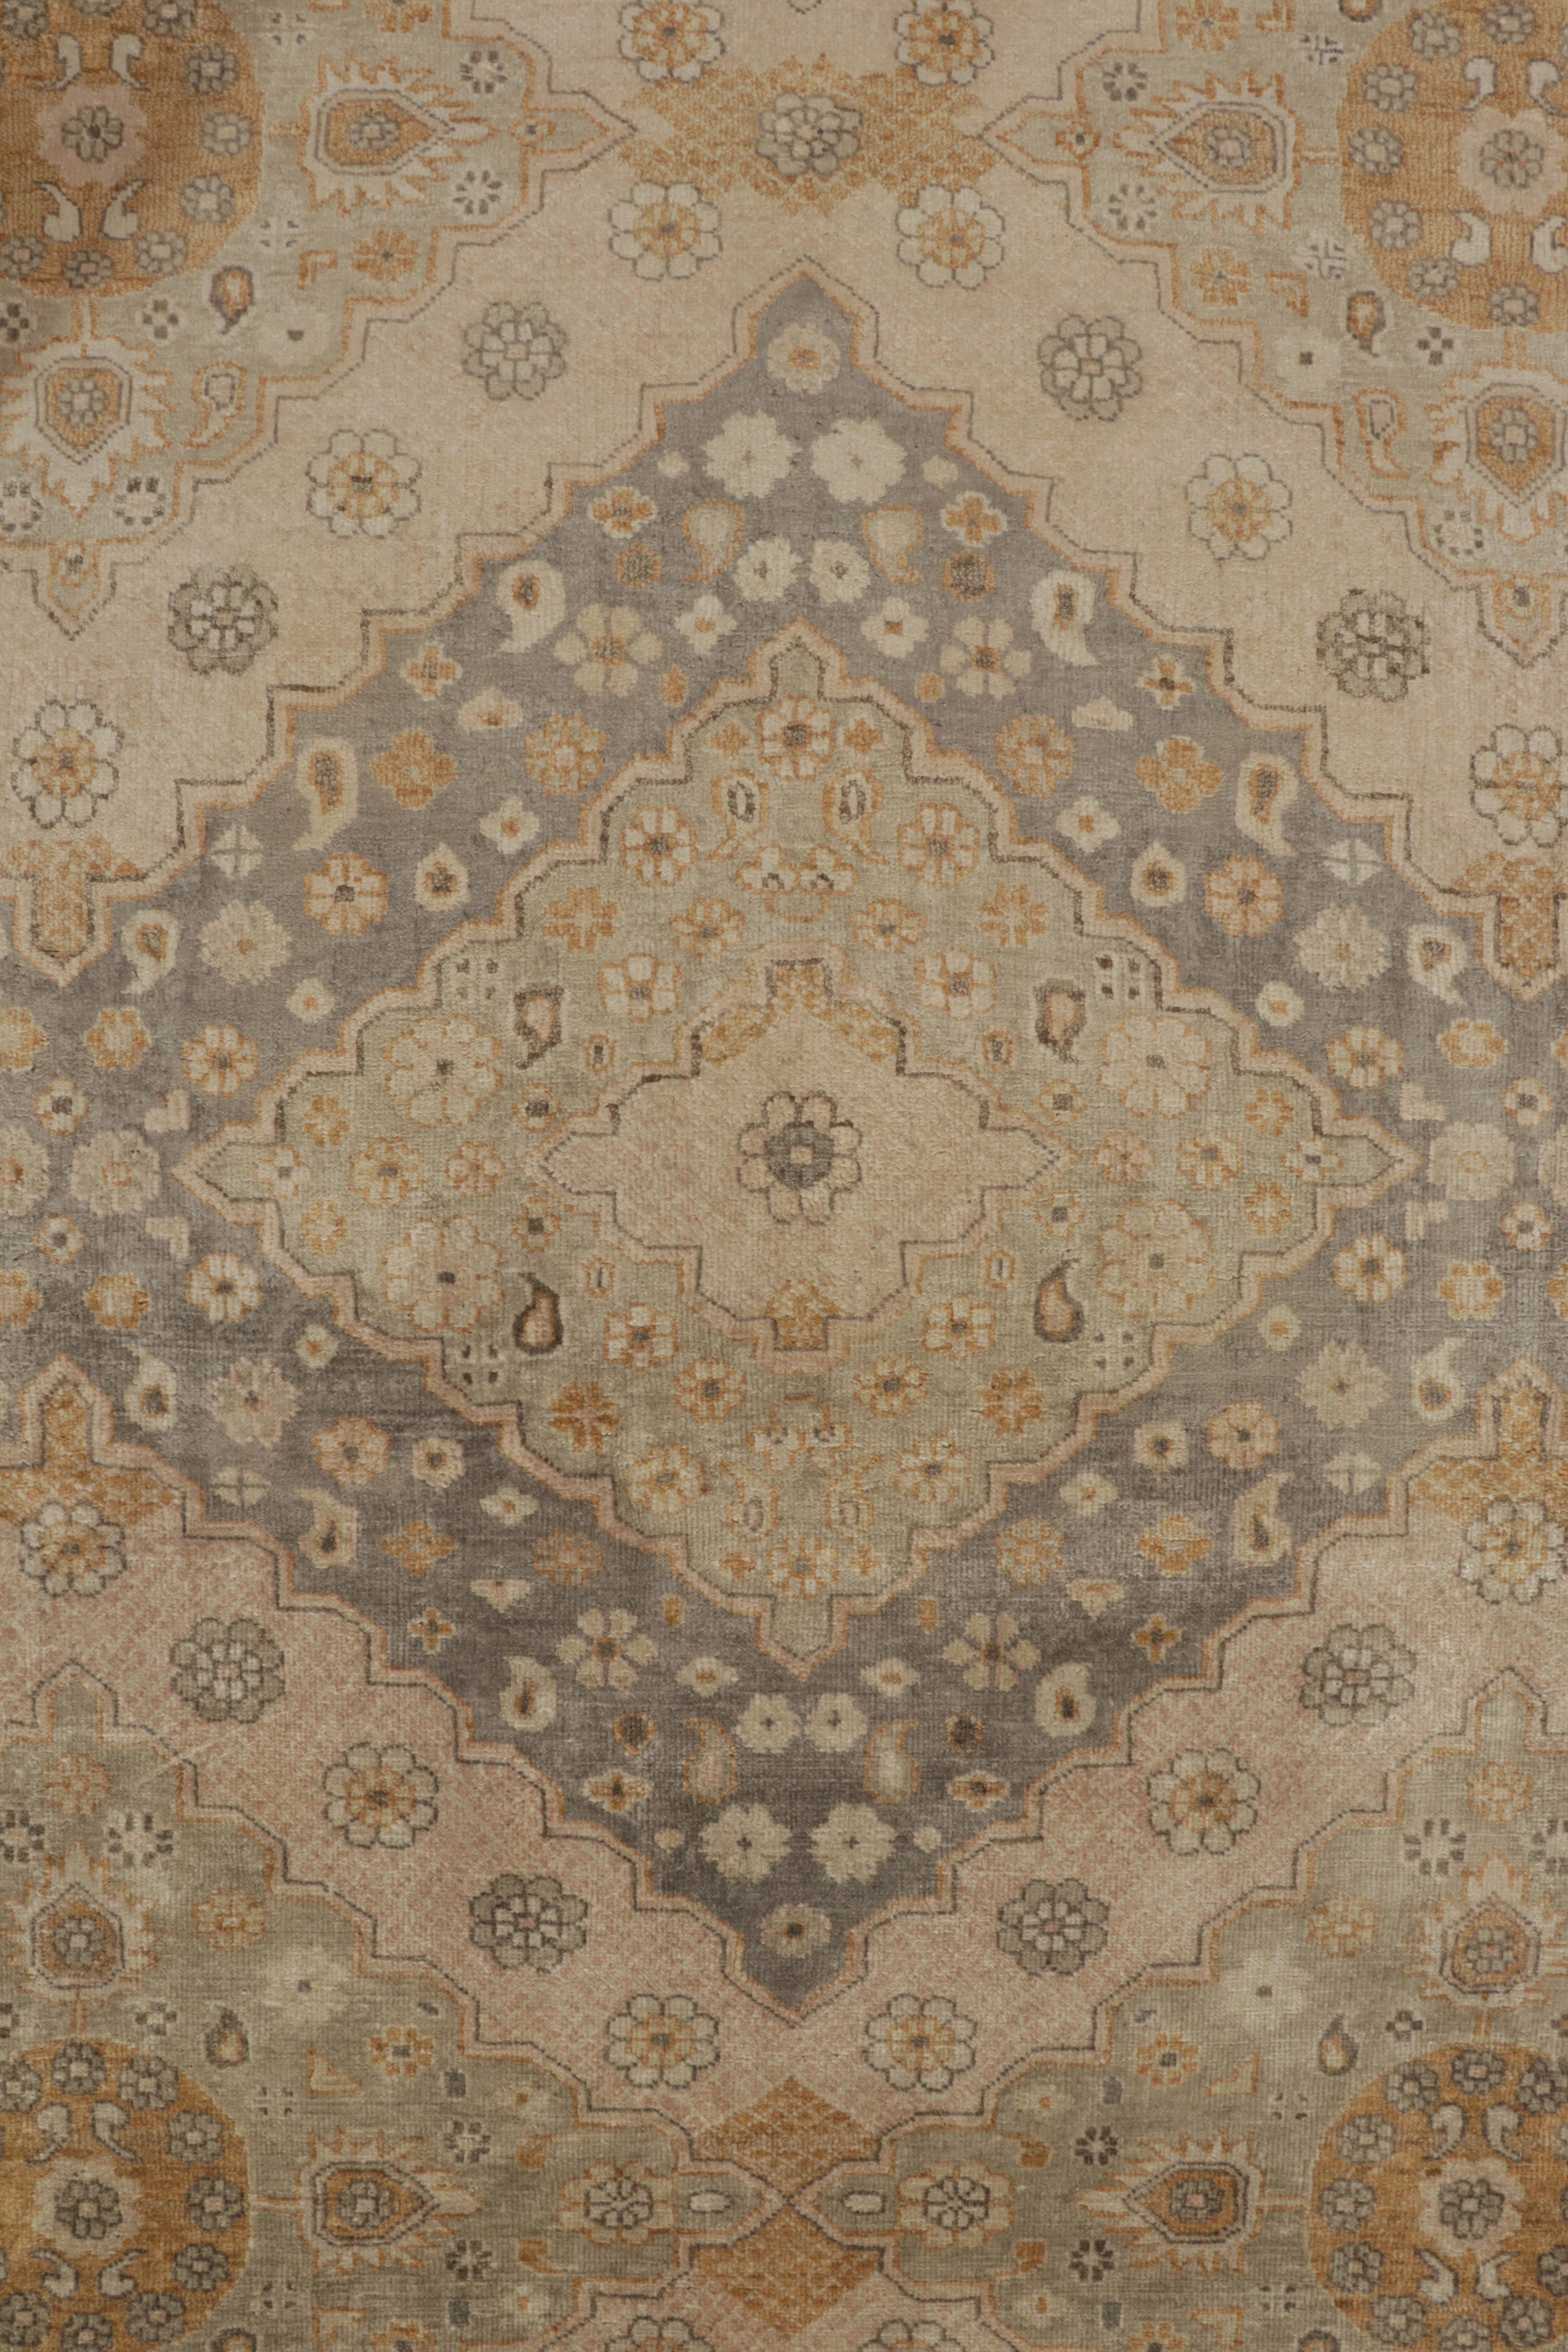 Contemporary Rug & Kilim’s Classic Khotan style rug in Beige & Gold Diamonds, Floral Patterns For Sale